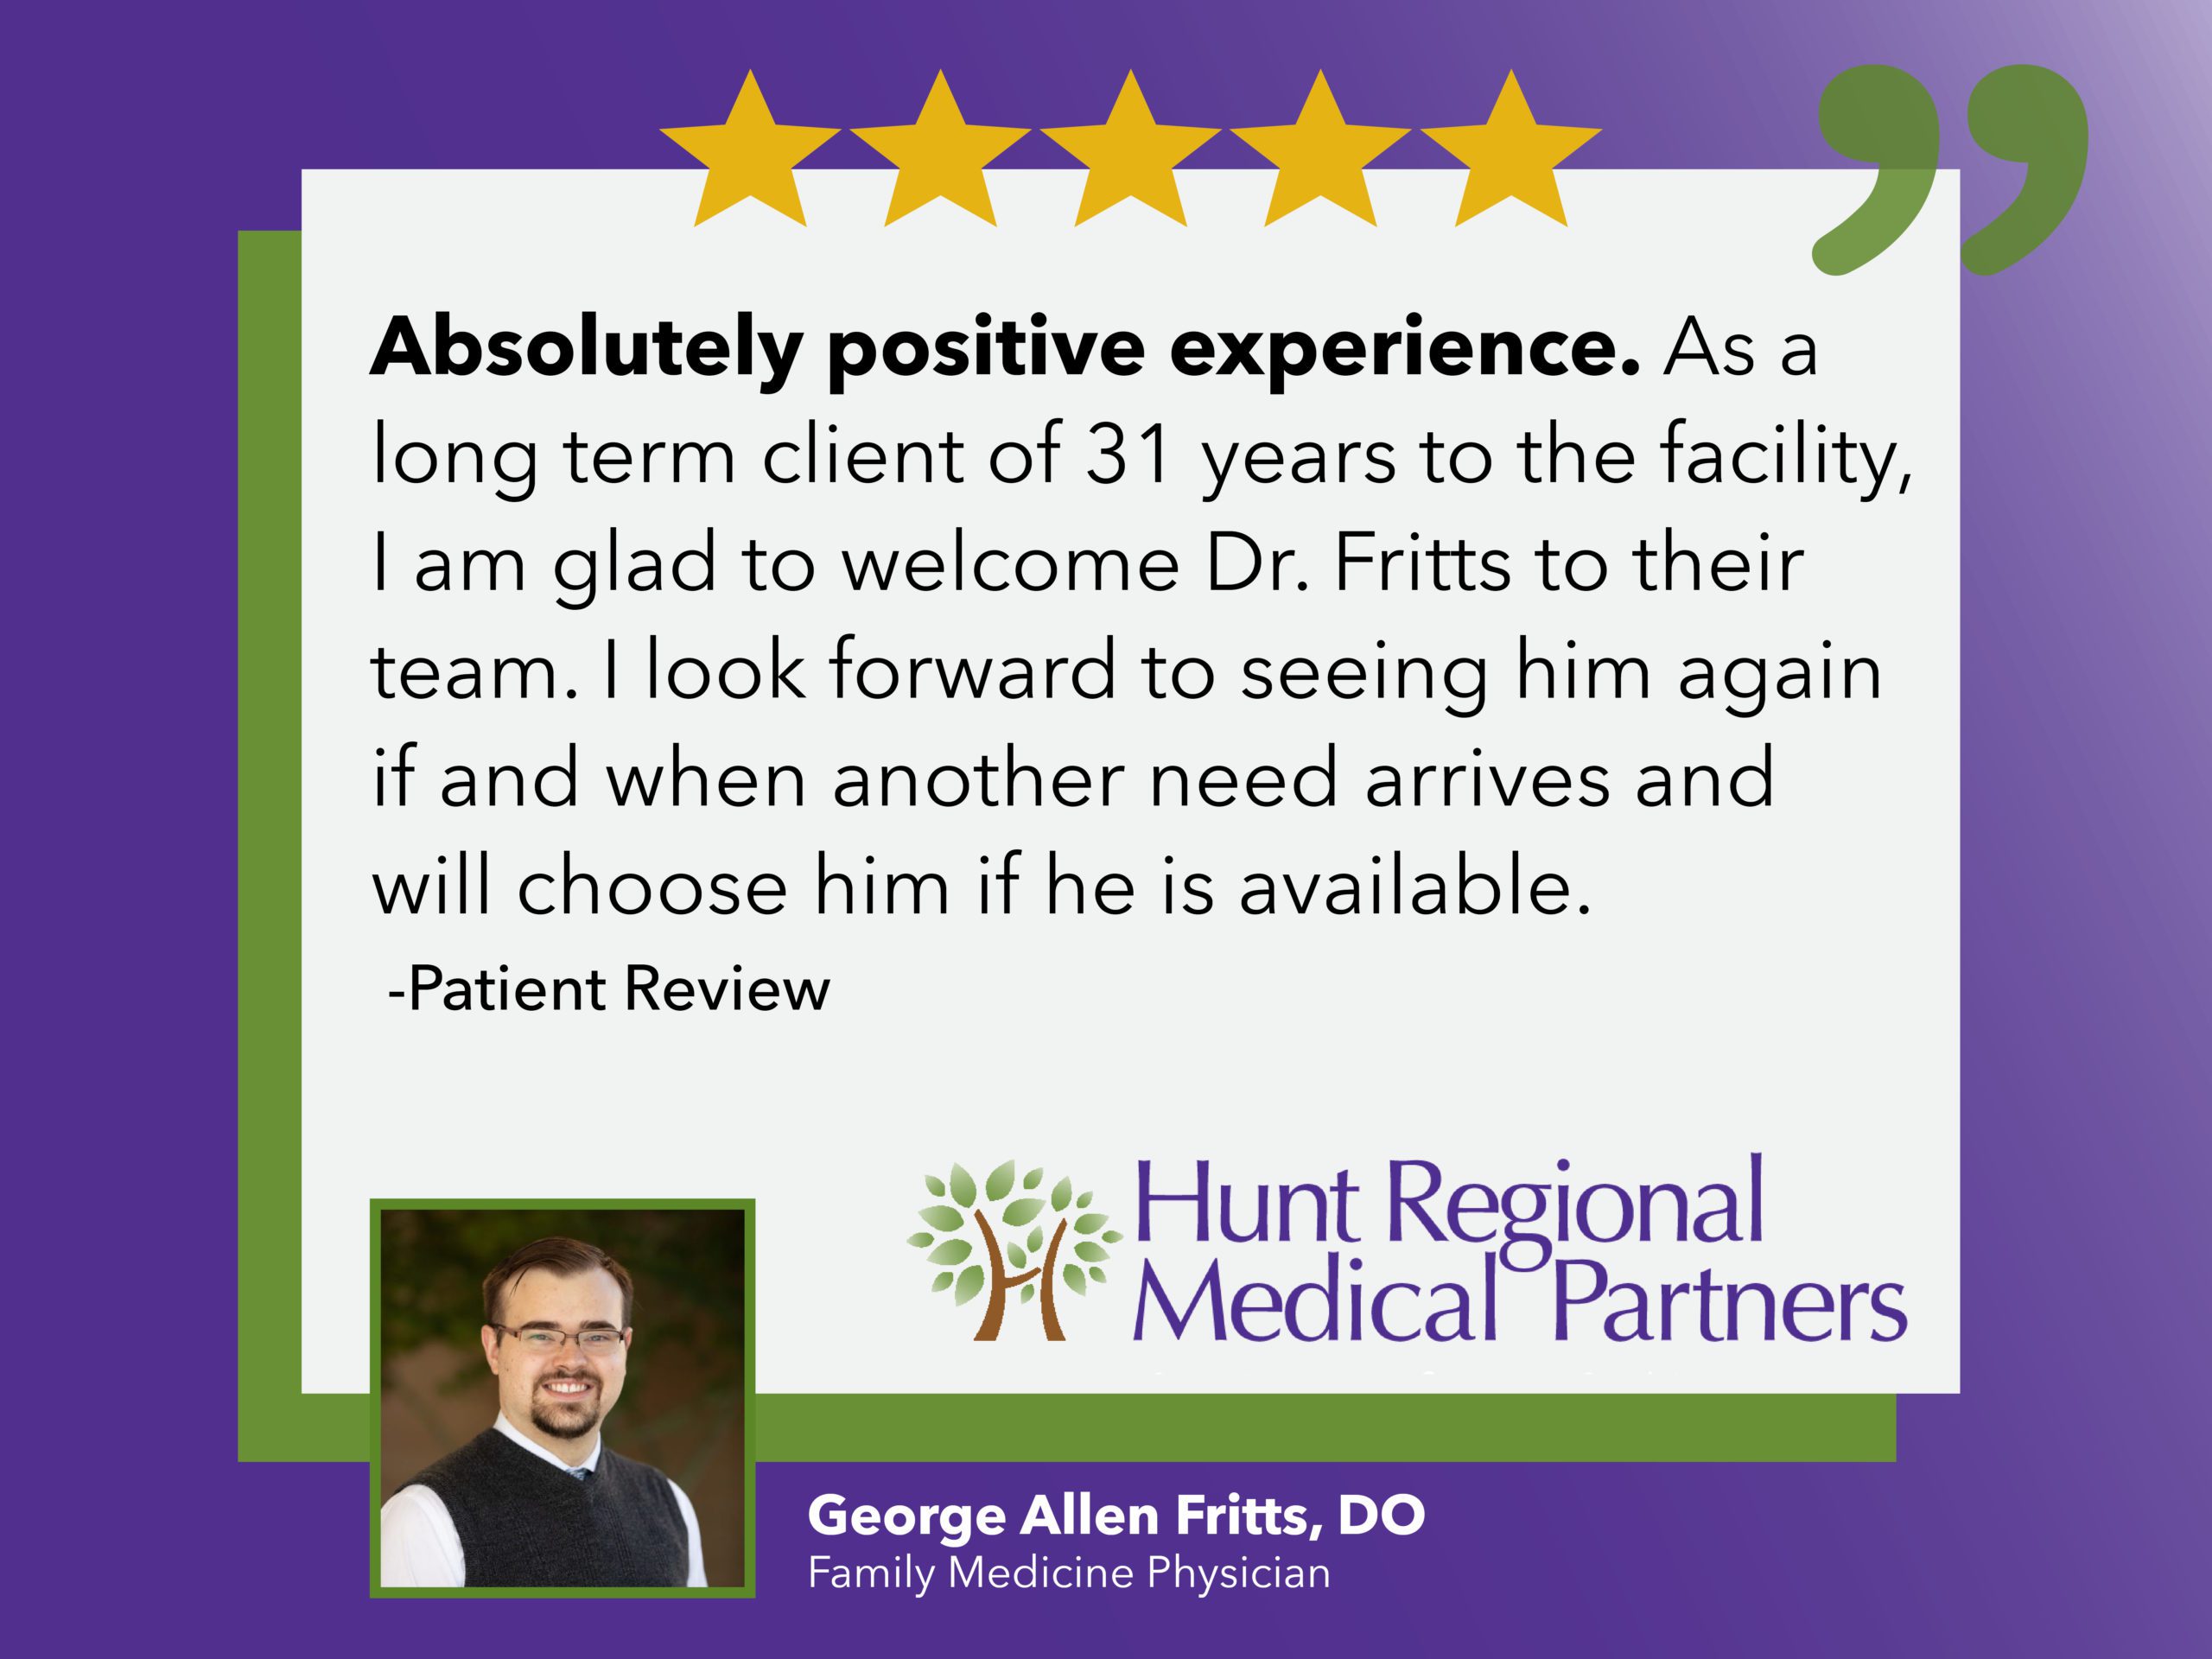 Absolutely positive experience. As a long term client of 31 years to the facility, I am gal to welcome Dr. Fritts to their team. I look forward to seeing him again if an when another need arrives and will choose him if he is available. | Patient Review | Hunt Regional Medical Partners | George Allen Fritts, DO | Family Medicine Physician